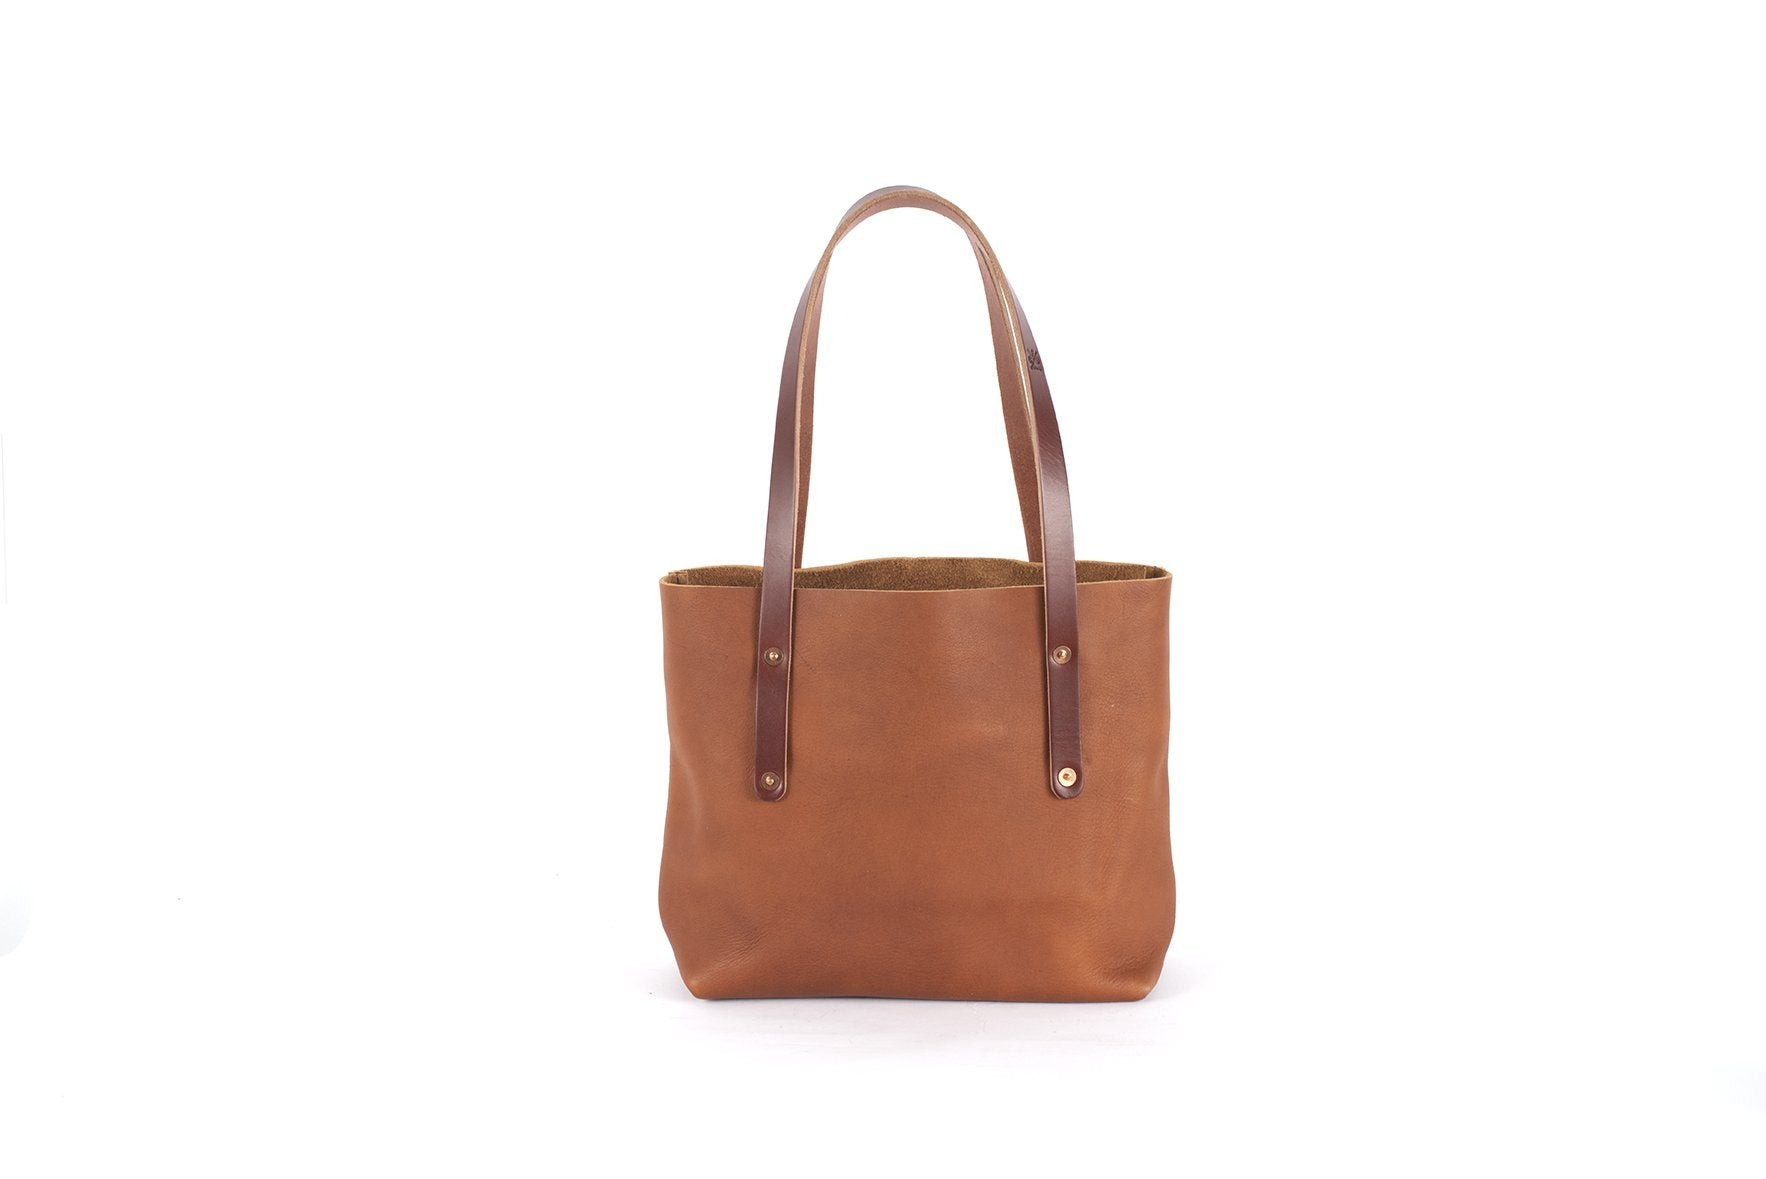 AVERY LEATHER TOTE BAG - SMALL